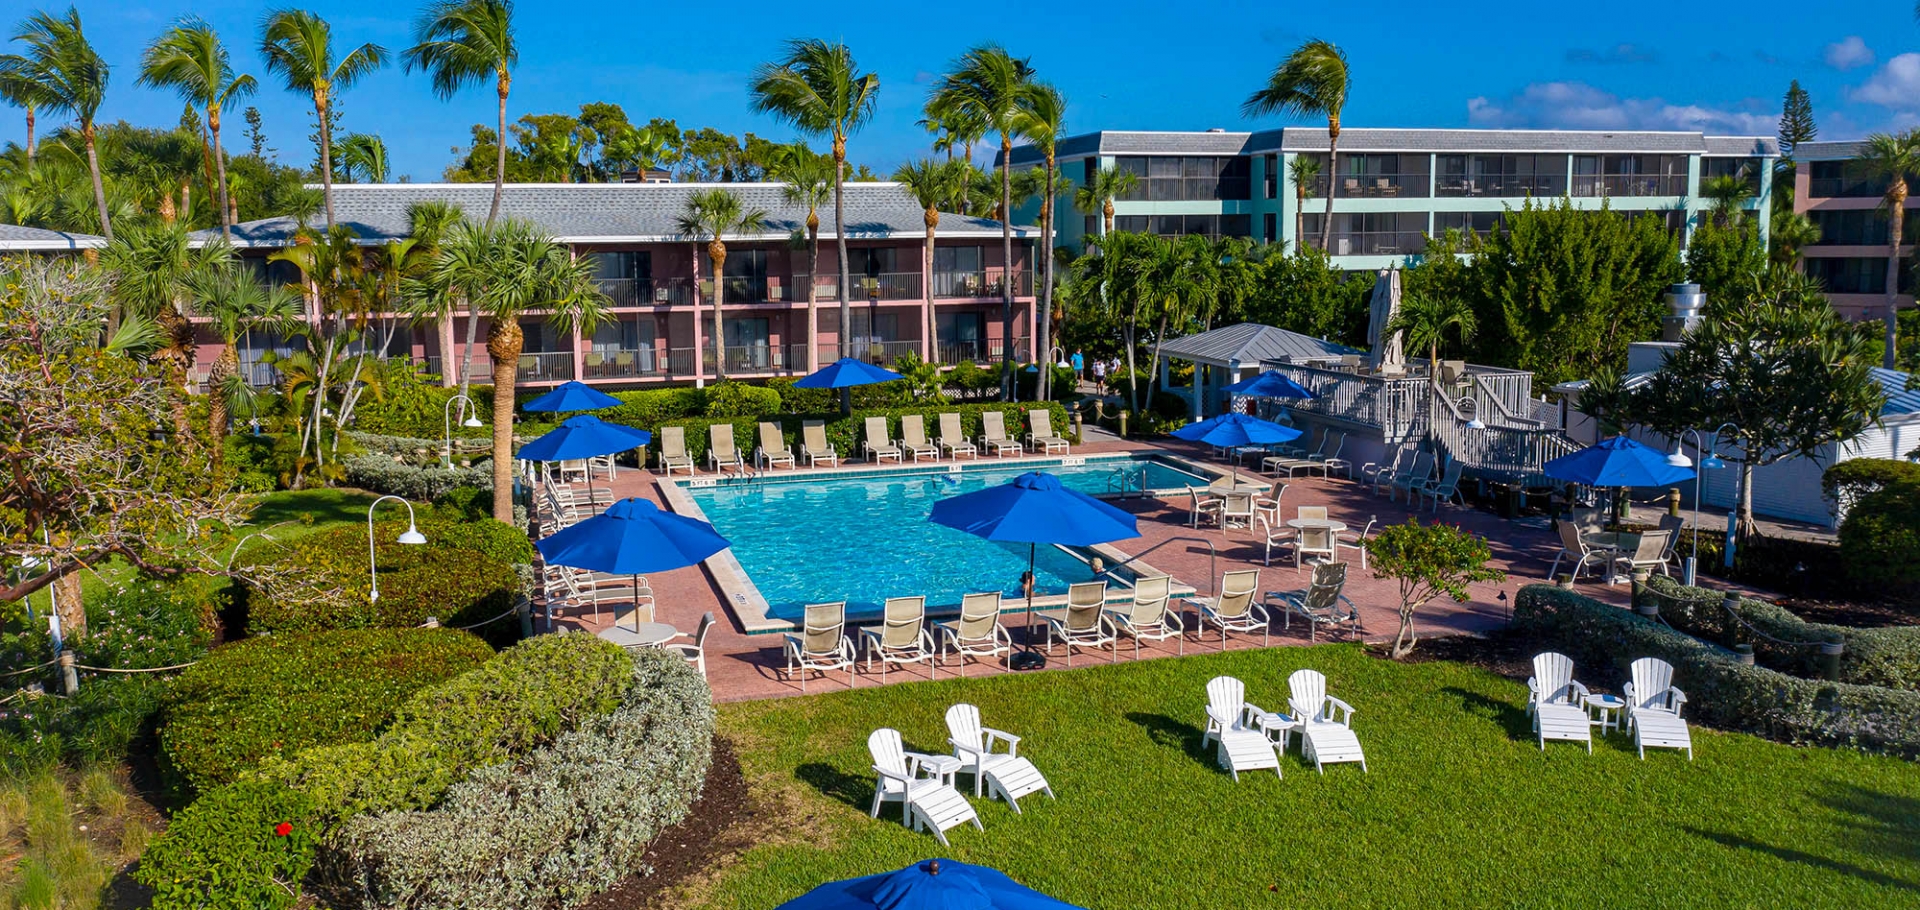 Pool view of the top rated Sanibel Island Hotel